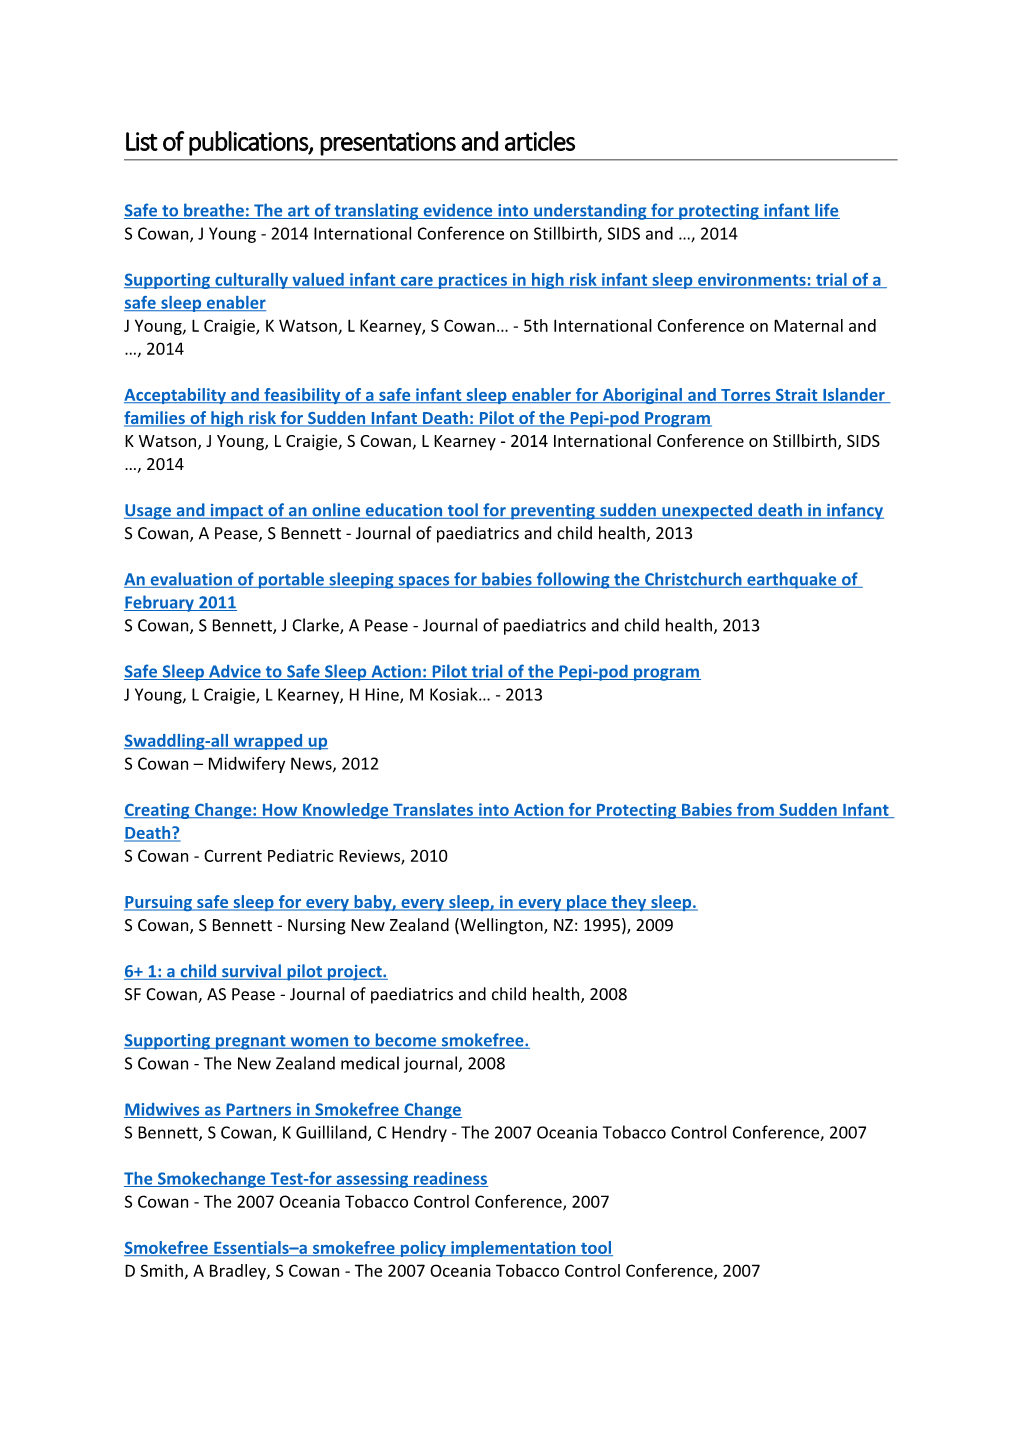 List of Publications, Presentations and Articles